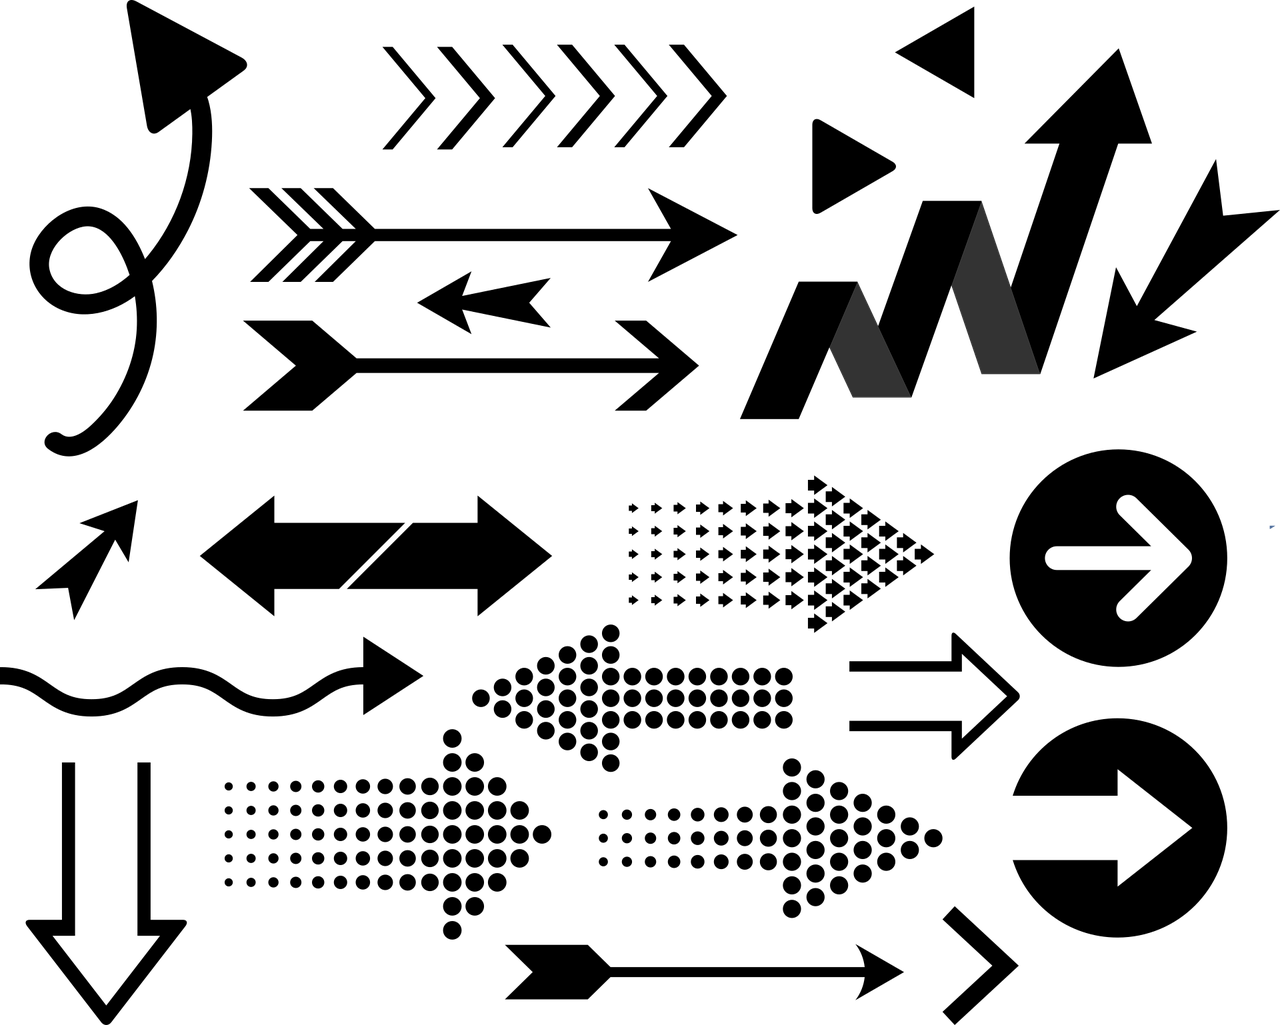 a man riding a snowboard down a snow covered slope, a 3D render, by Attila Meszlenyi, minimalism, black house, crawling out of a dark room, triangles, header with logo